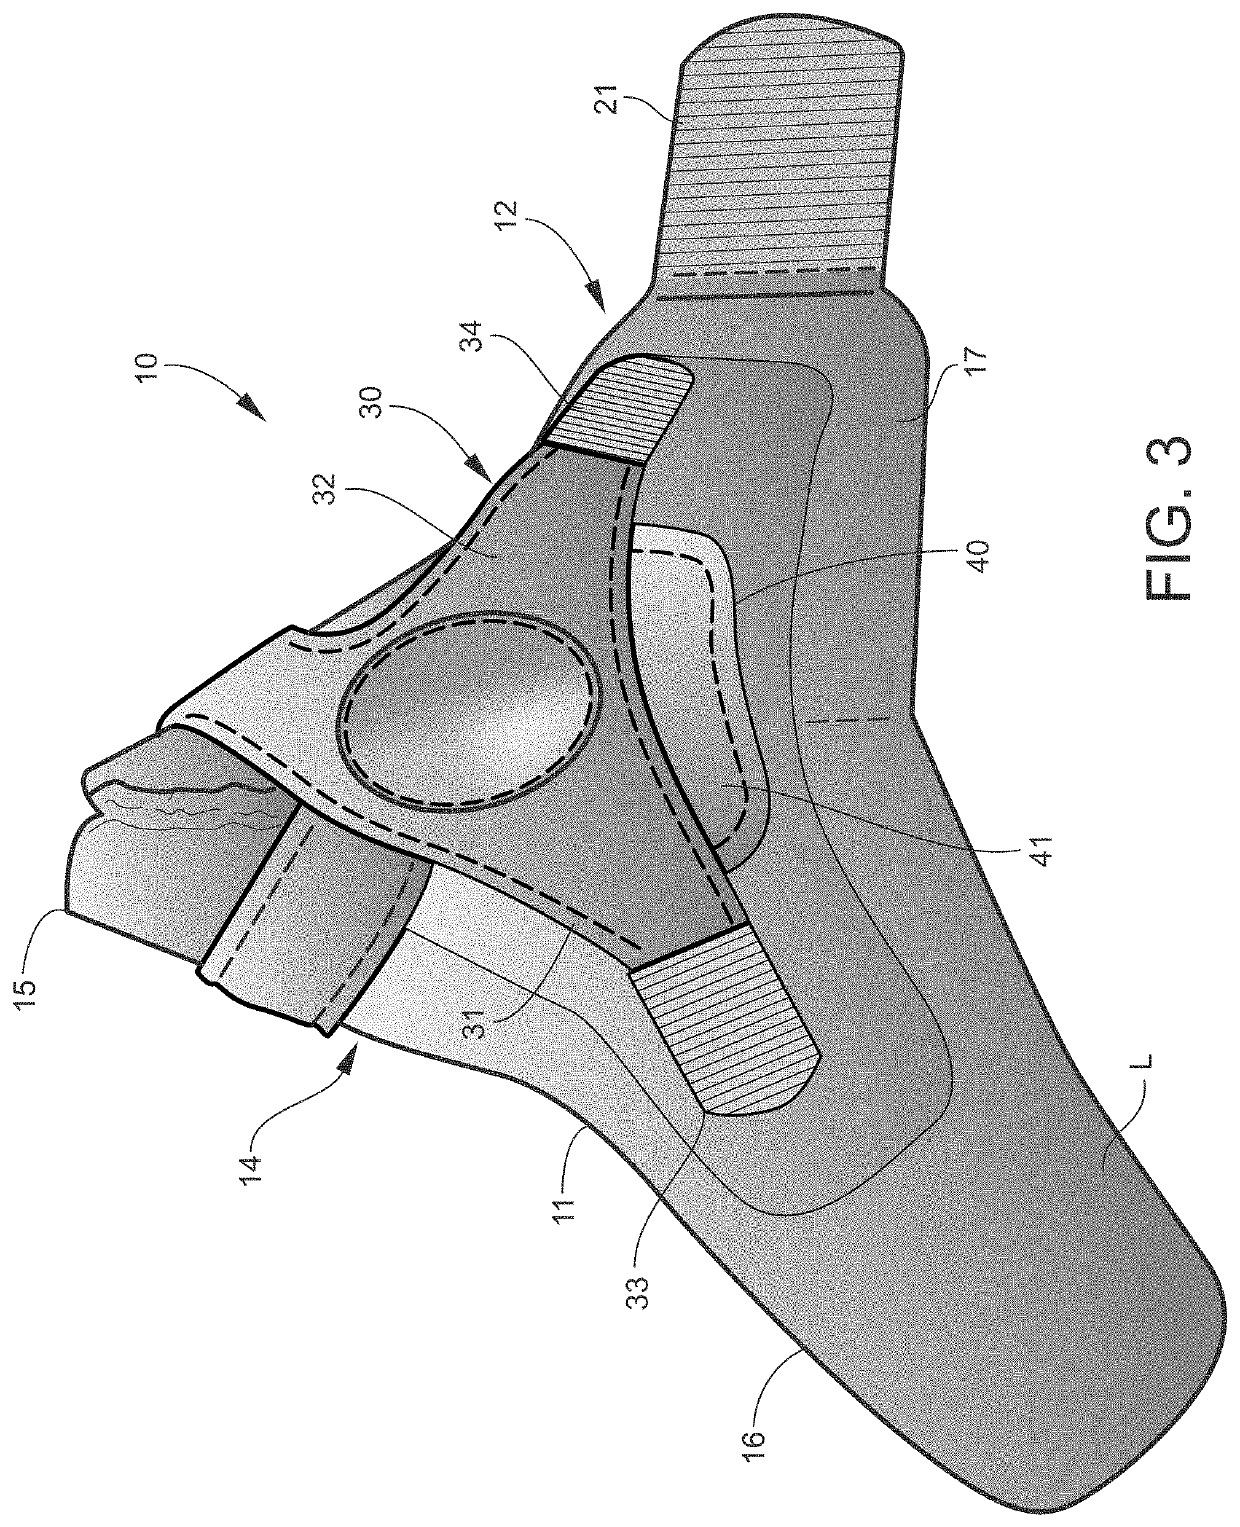 Orthopedic thumb splint and method for stabilizing the trapeziometacarpal joint of a user